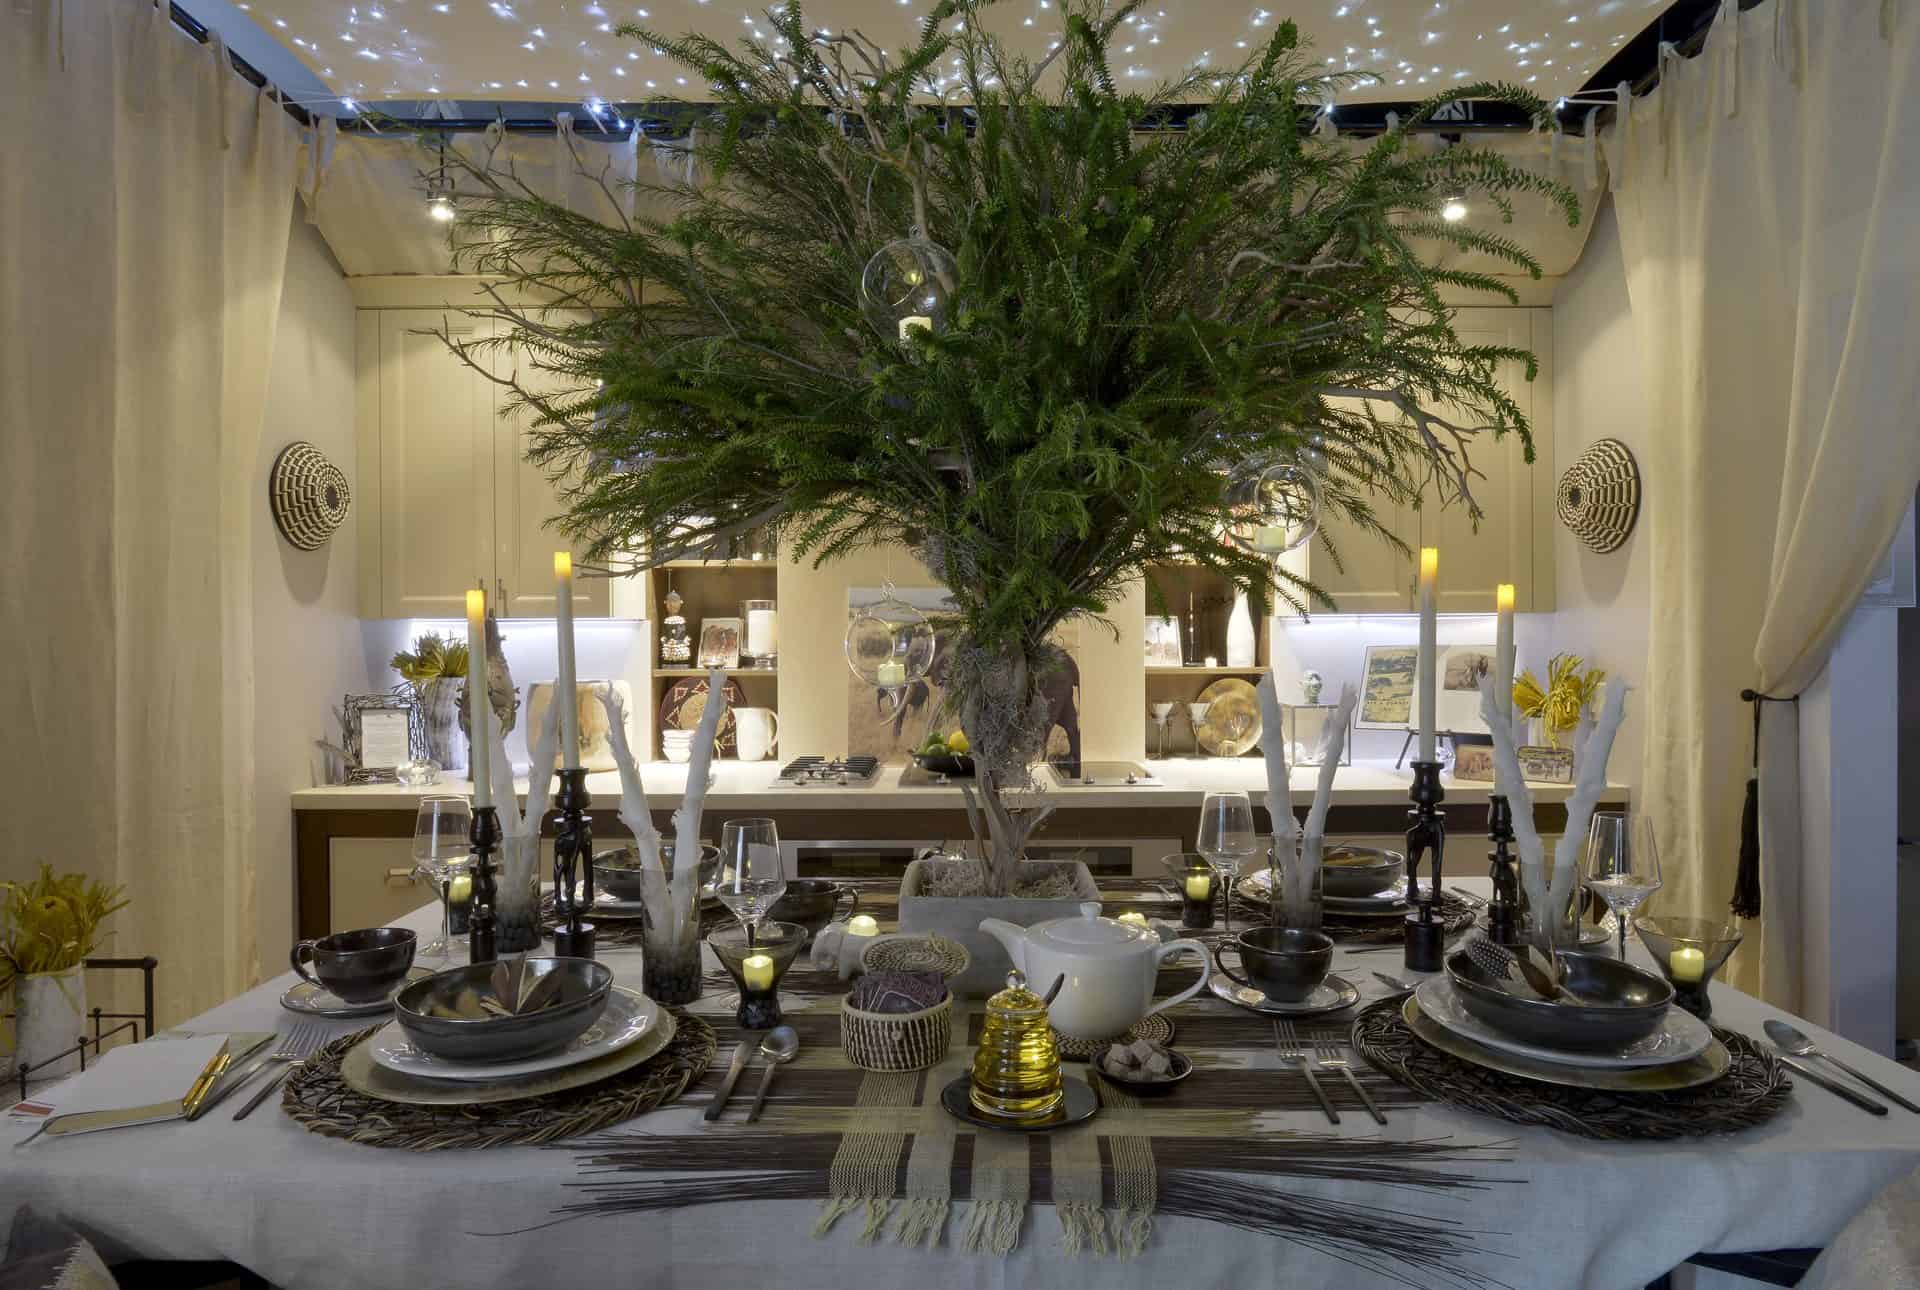 Tabletop design using browns, grays and yellows, pewter bowls and exotic accents from branch-like white candles, weaved brown and yellow straw runner and a large mixed greens cedar pine branches as centerpiece. 